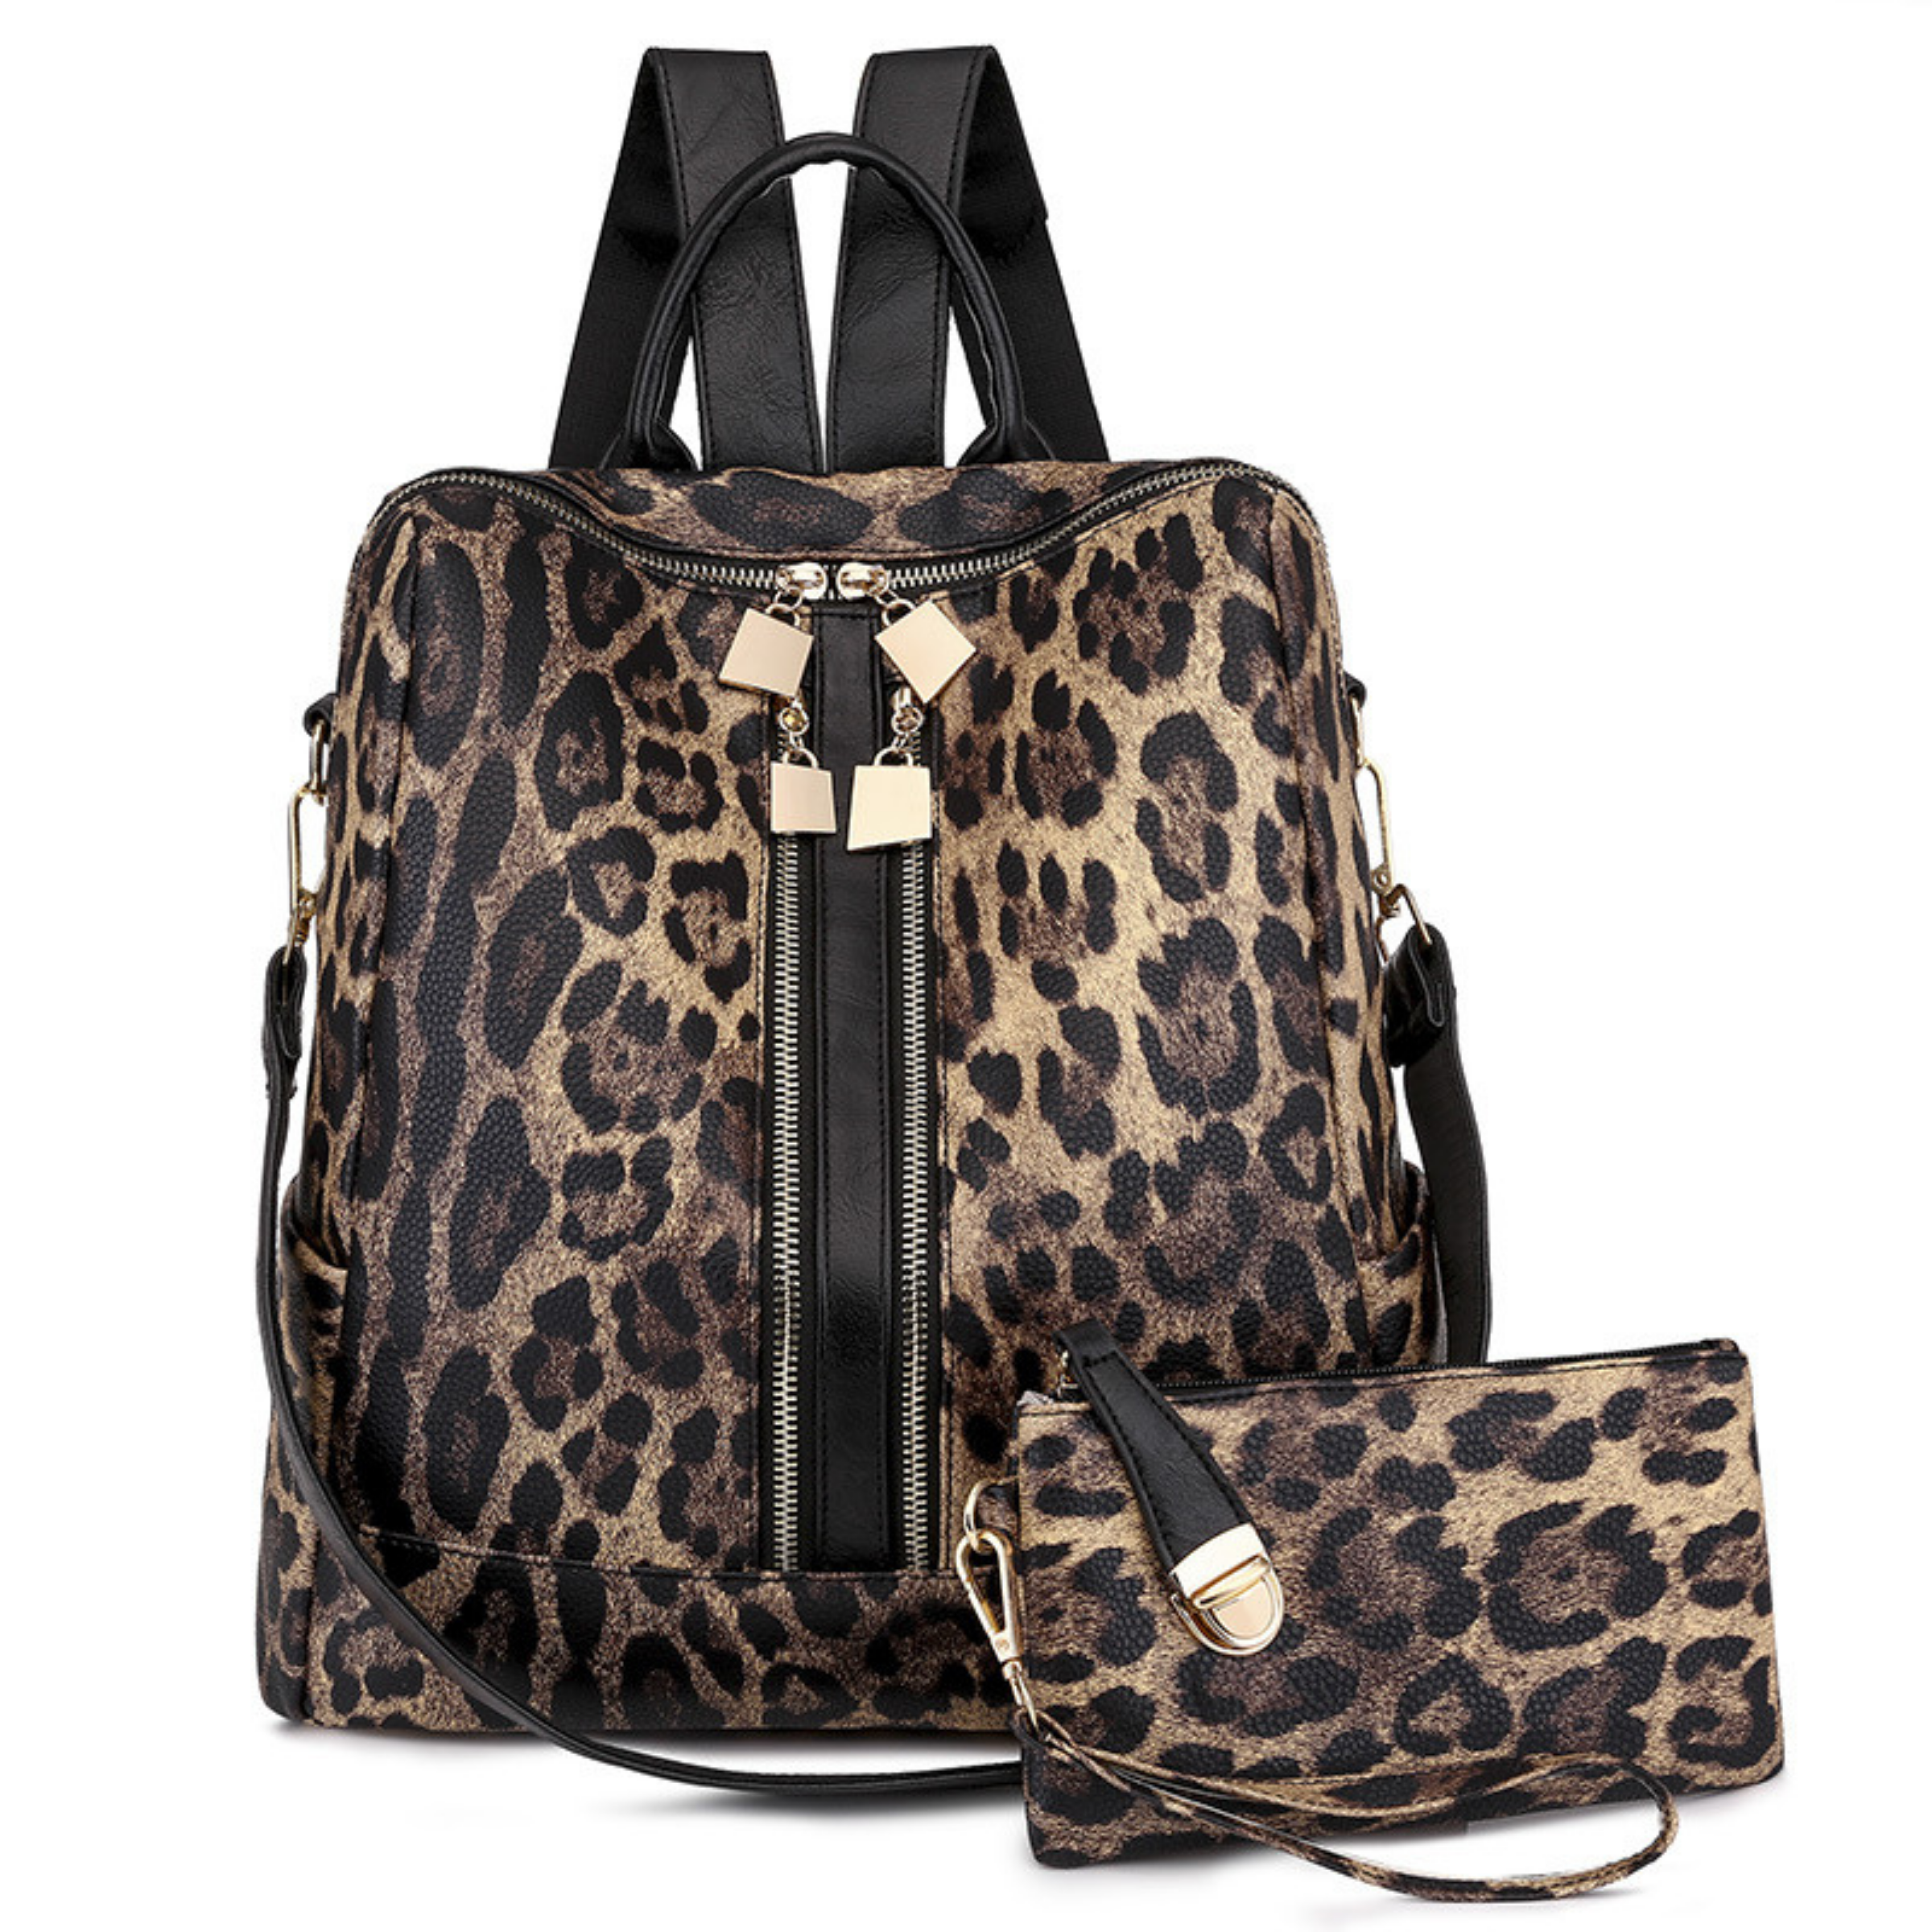 Buy Leopard Convertible Bag Color Strap Backpack Handbag Free Shipping  Ships From USA Vegan Leather Boutique Handbag Online in India - Etsy